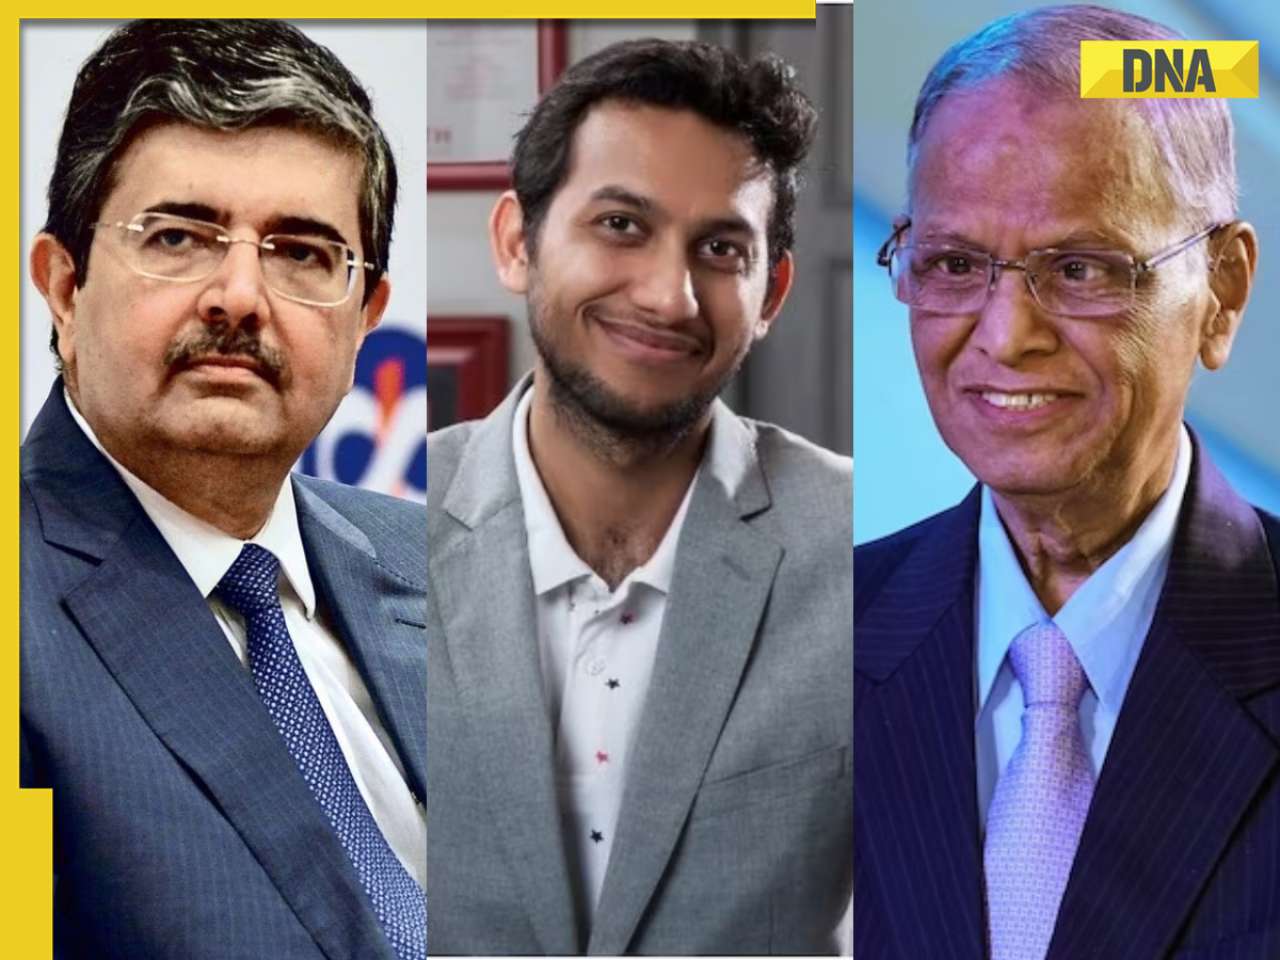 OYO founder Ritesh Agarwal says 21-year-olds should learn these from Narayana Murthy, Uday Kotak...